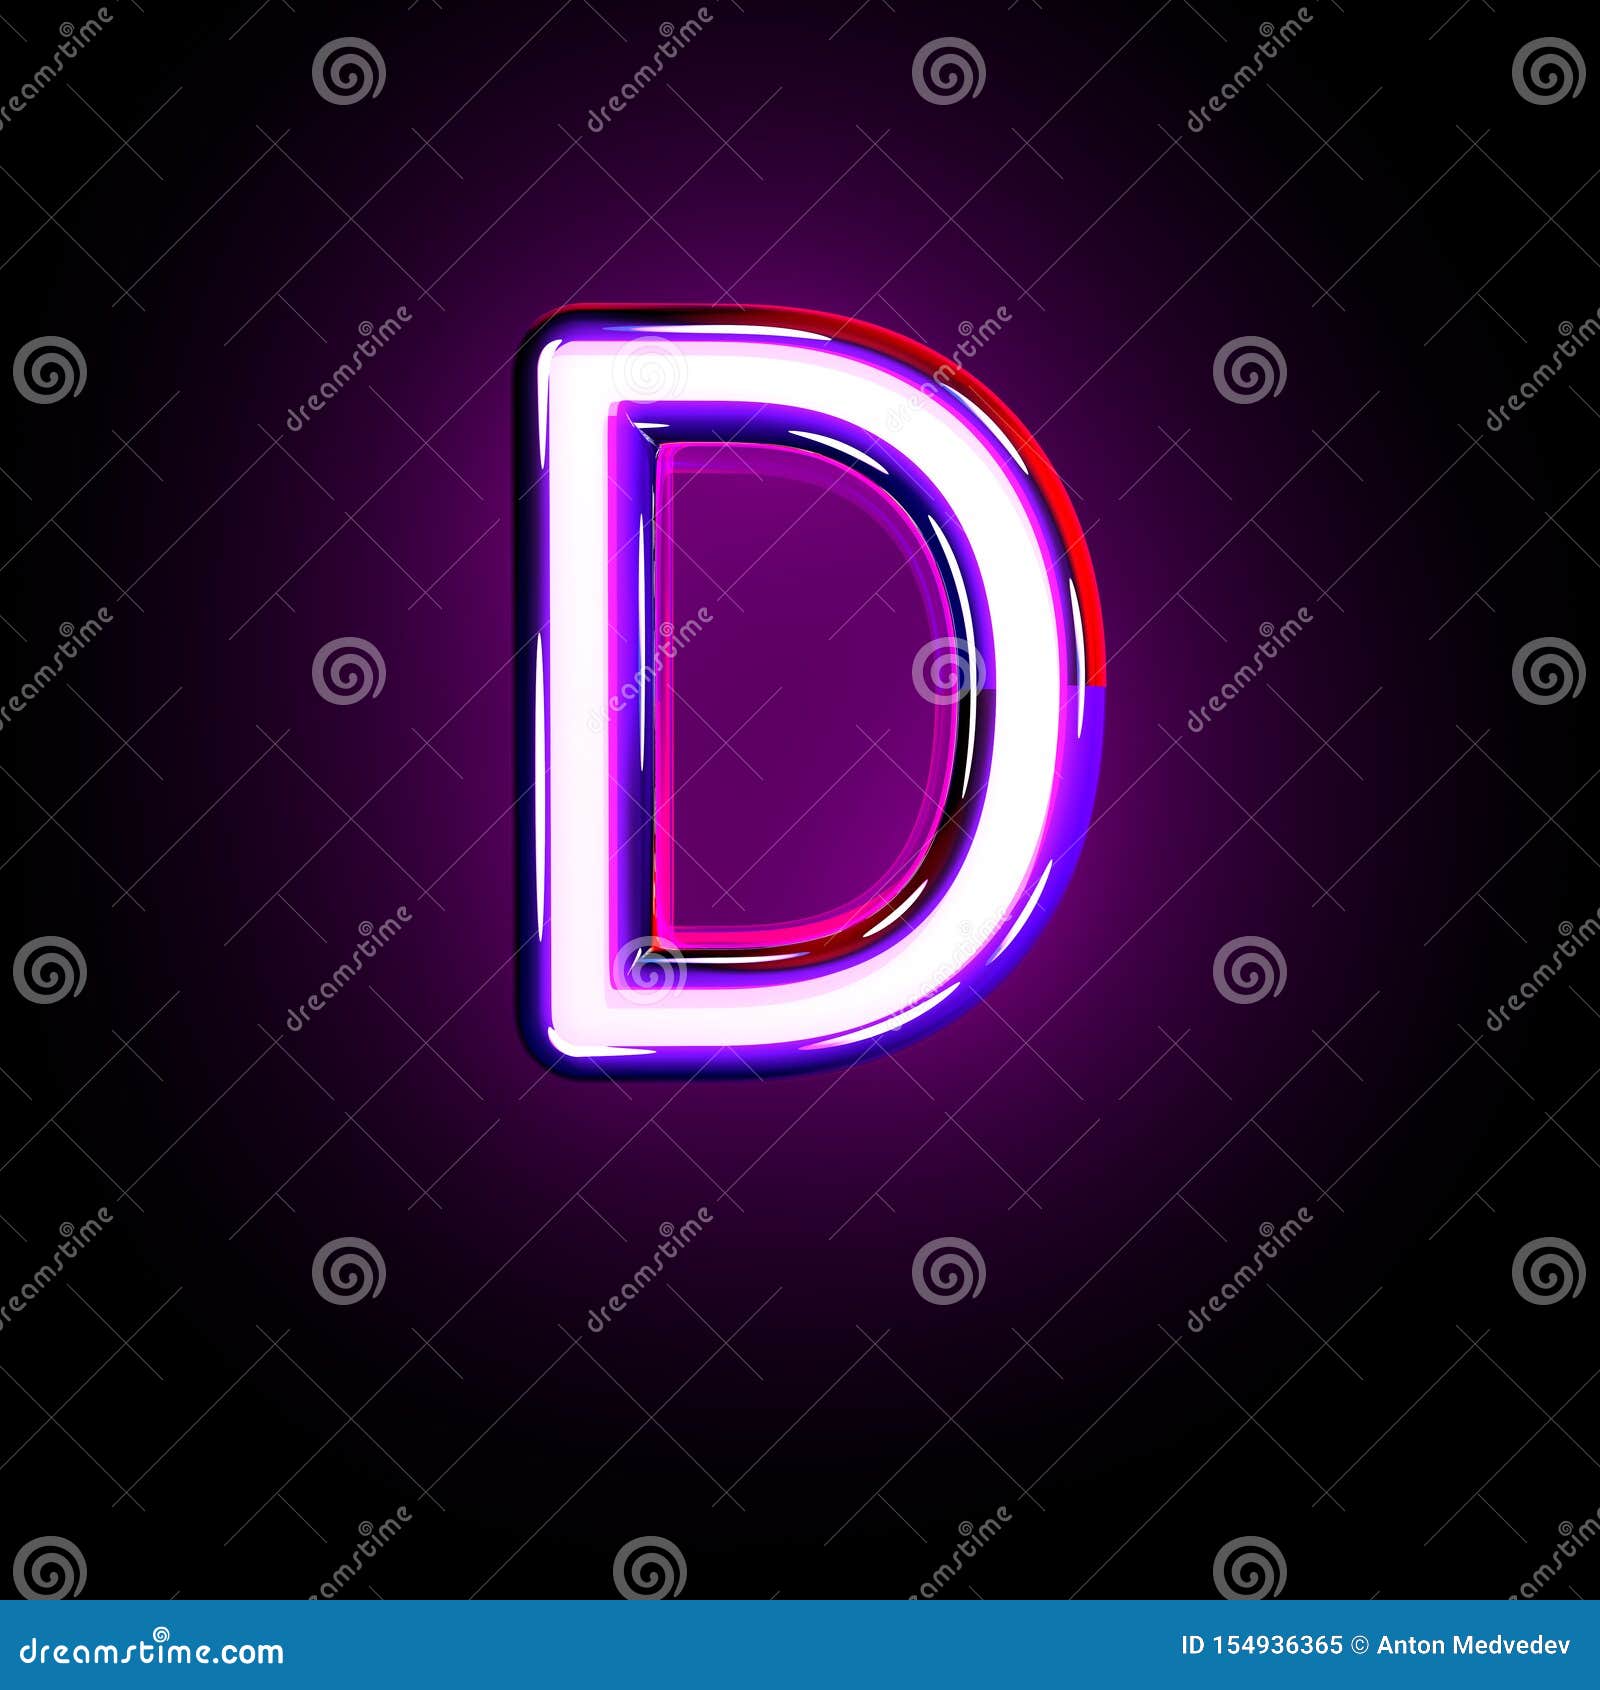 Purple Shining Neon Font - Letter D Isolated on Black Background, 3D ...